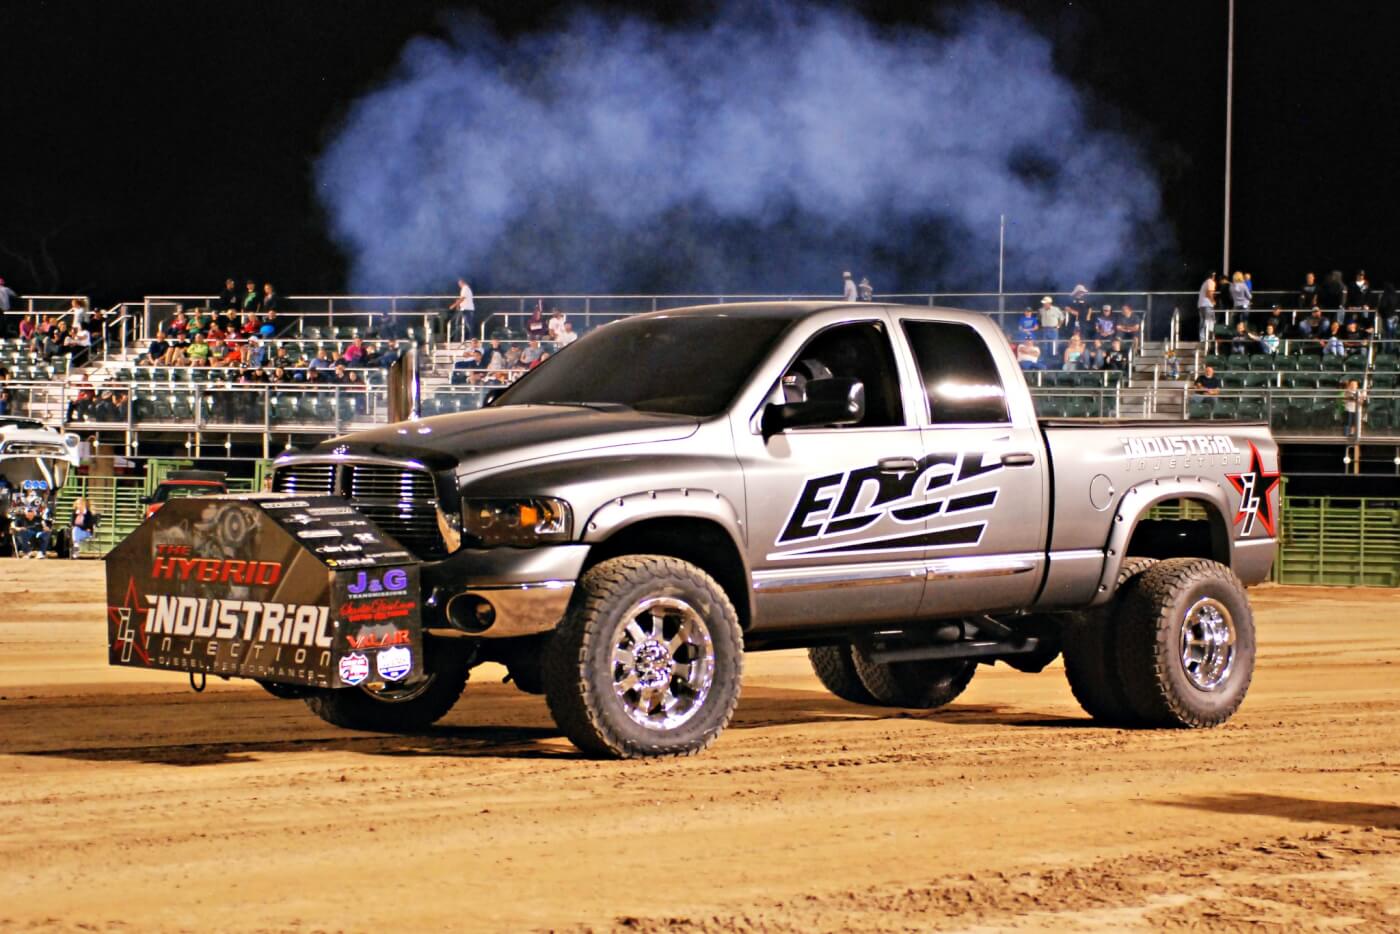 Tom Hansen has been running his 5.9L Common Rail Cummins in the 3.0 Inducer class for three straight seasons now. With Edge Products and Industrial Injection as his main sponsors, you can bet he’s a front runner week in and week out. Pulling down the track to 311.4 feet put him atop the leader board taking home a first place check for the night.